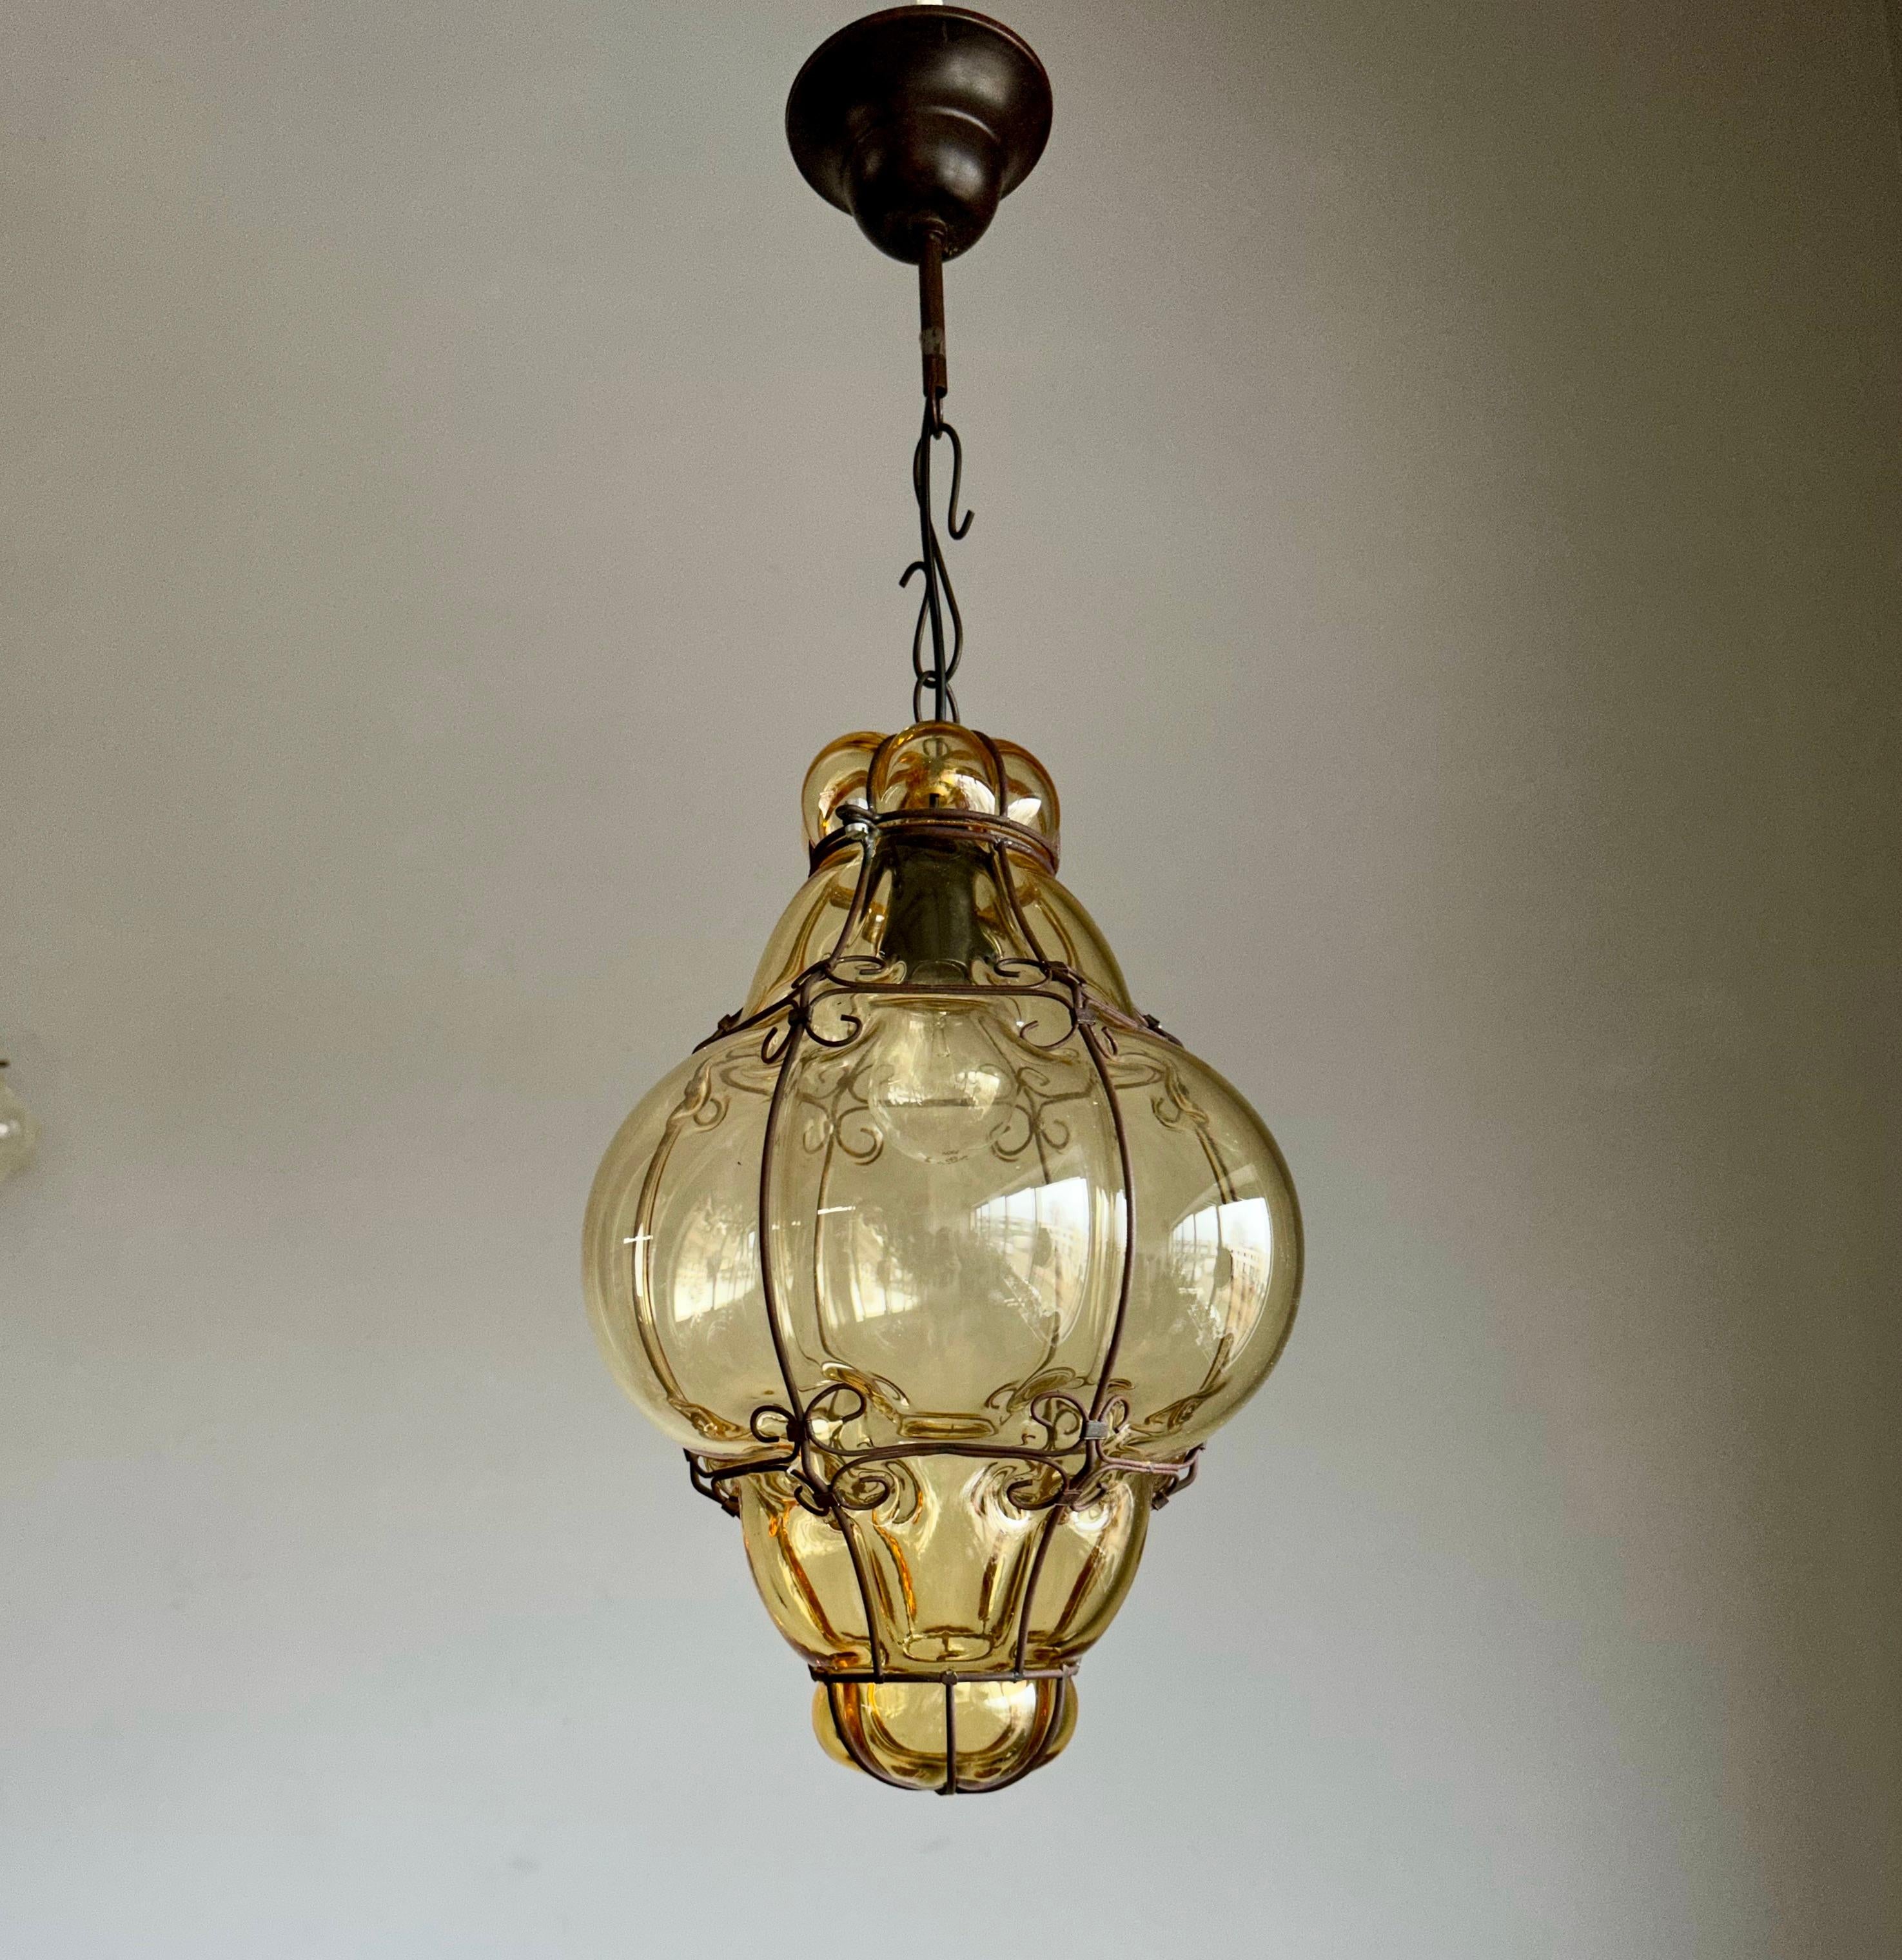 Antique Venetian Murano Pendant Light, Mouth Blown Smoked Glass in iron Frame 1